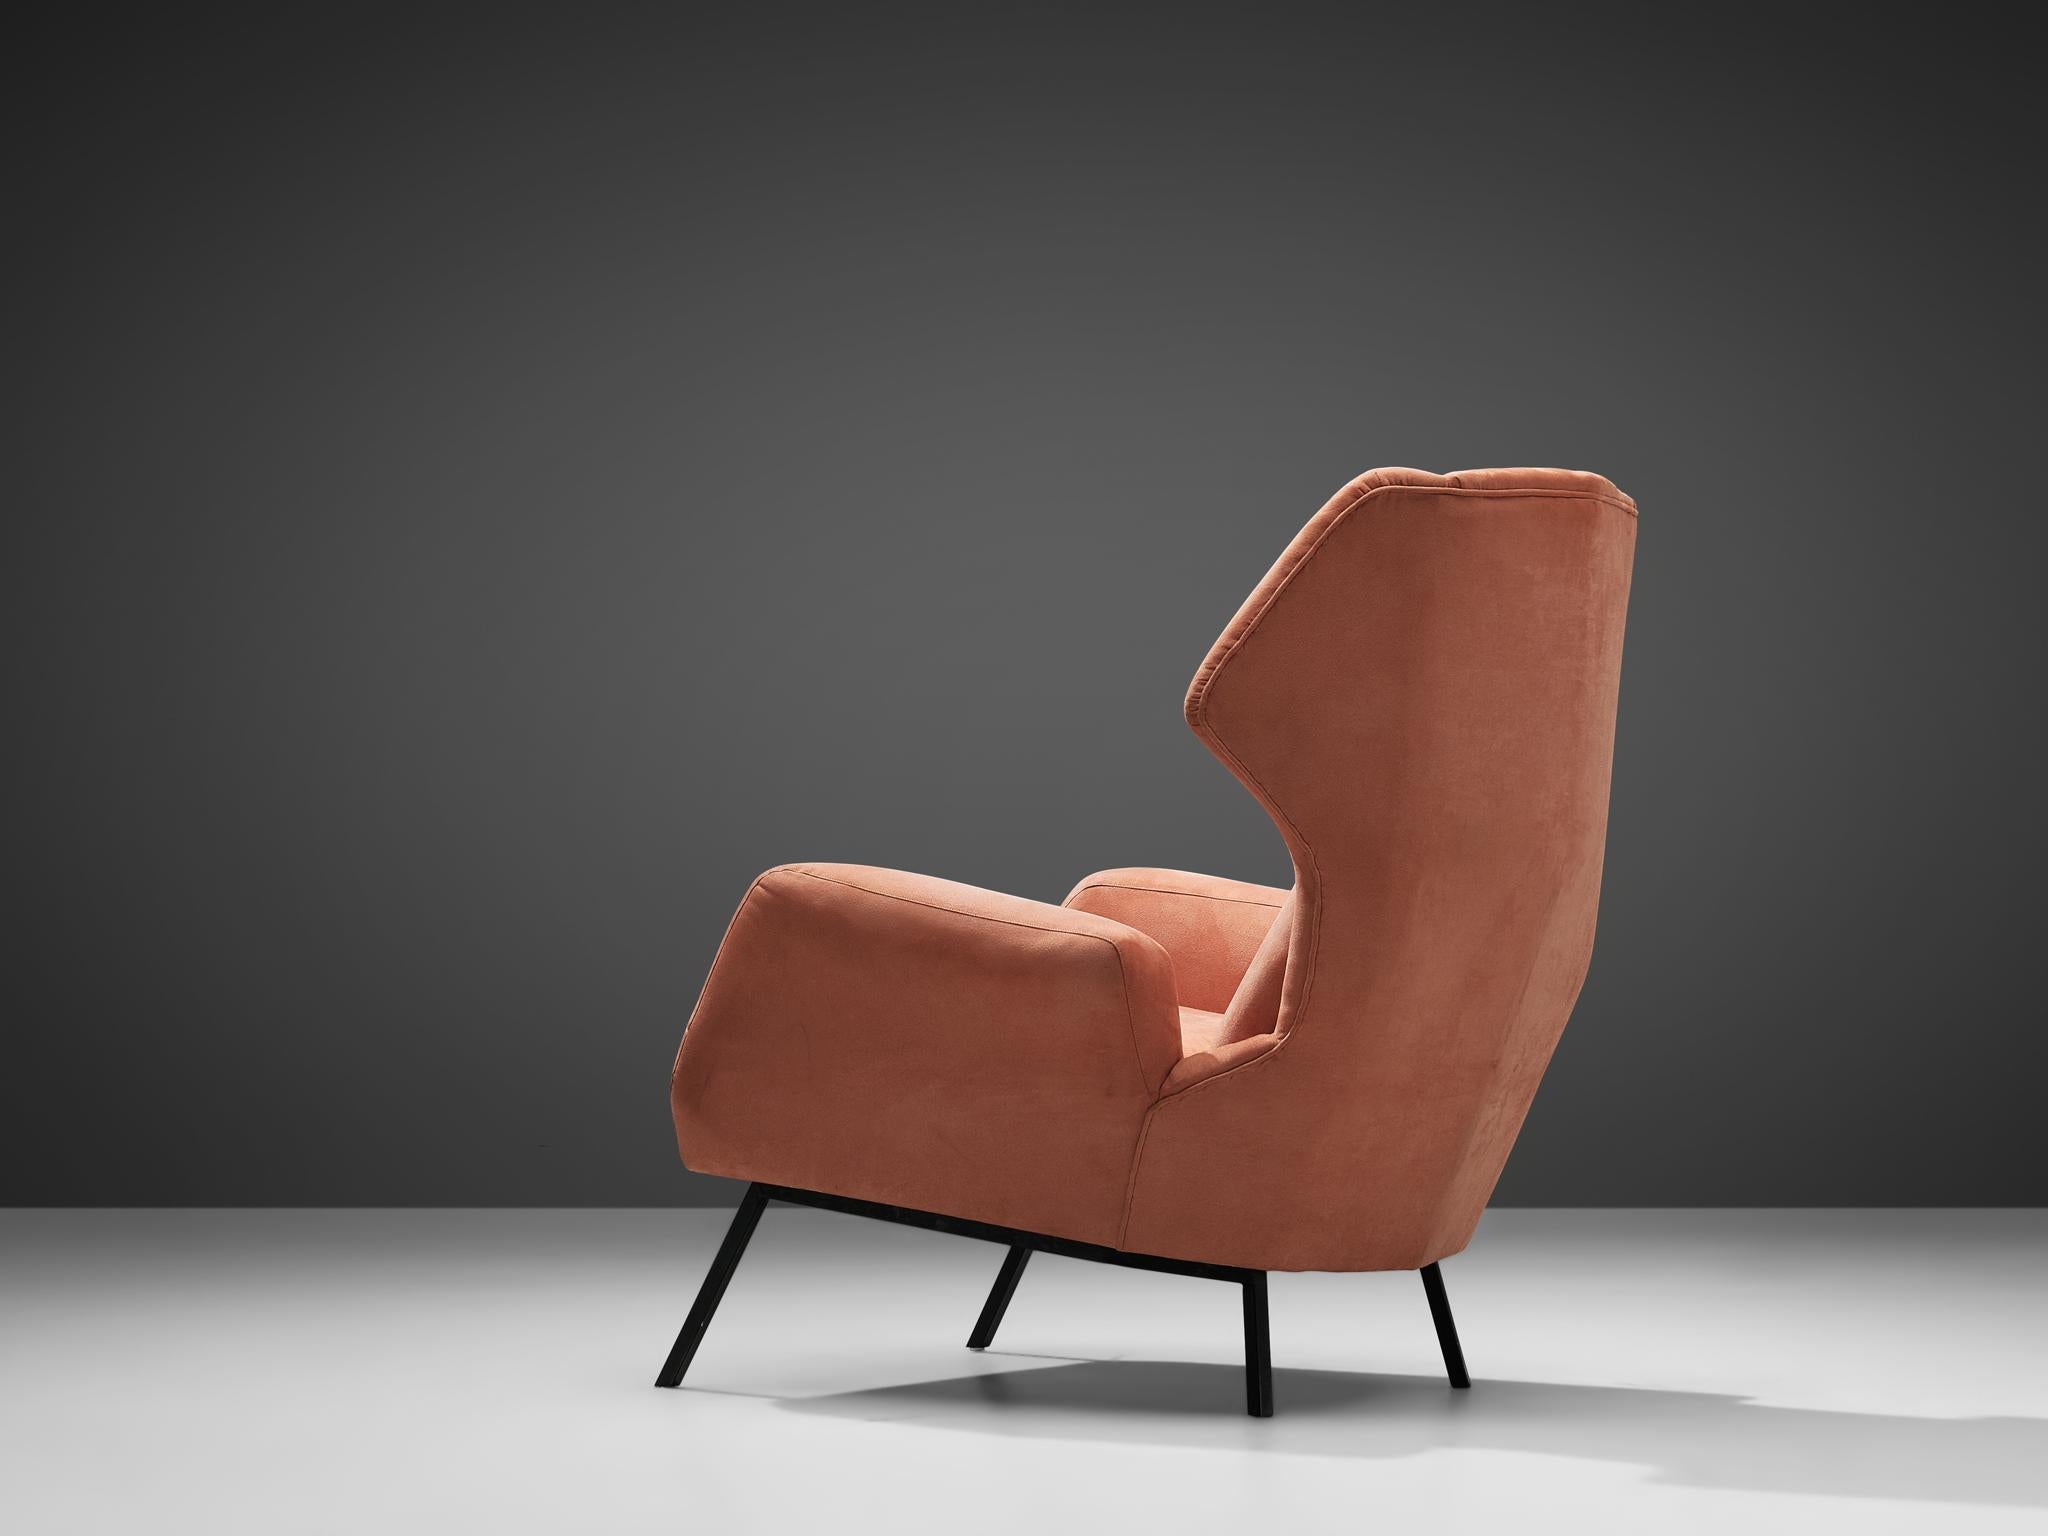 Wingback armchair, alcantara, metal, Italy, 1960s

This Classic Italian post-war wingback lounge chair has an unusually high back and gracious wings that contain dramatized pointed corners. The elegant armrests are slightly curved outwards and the